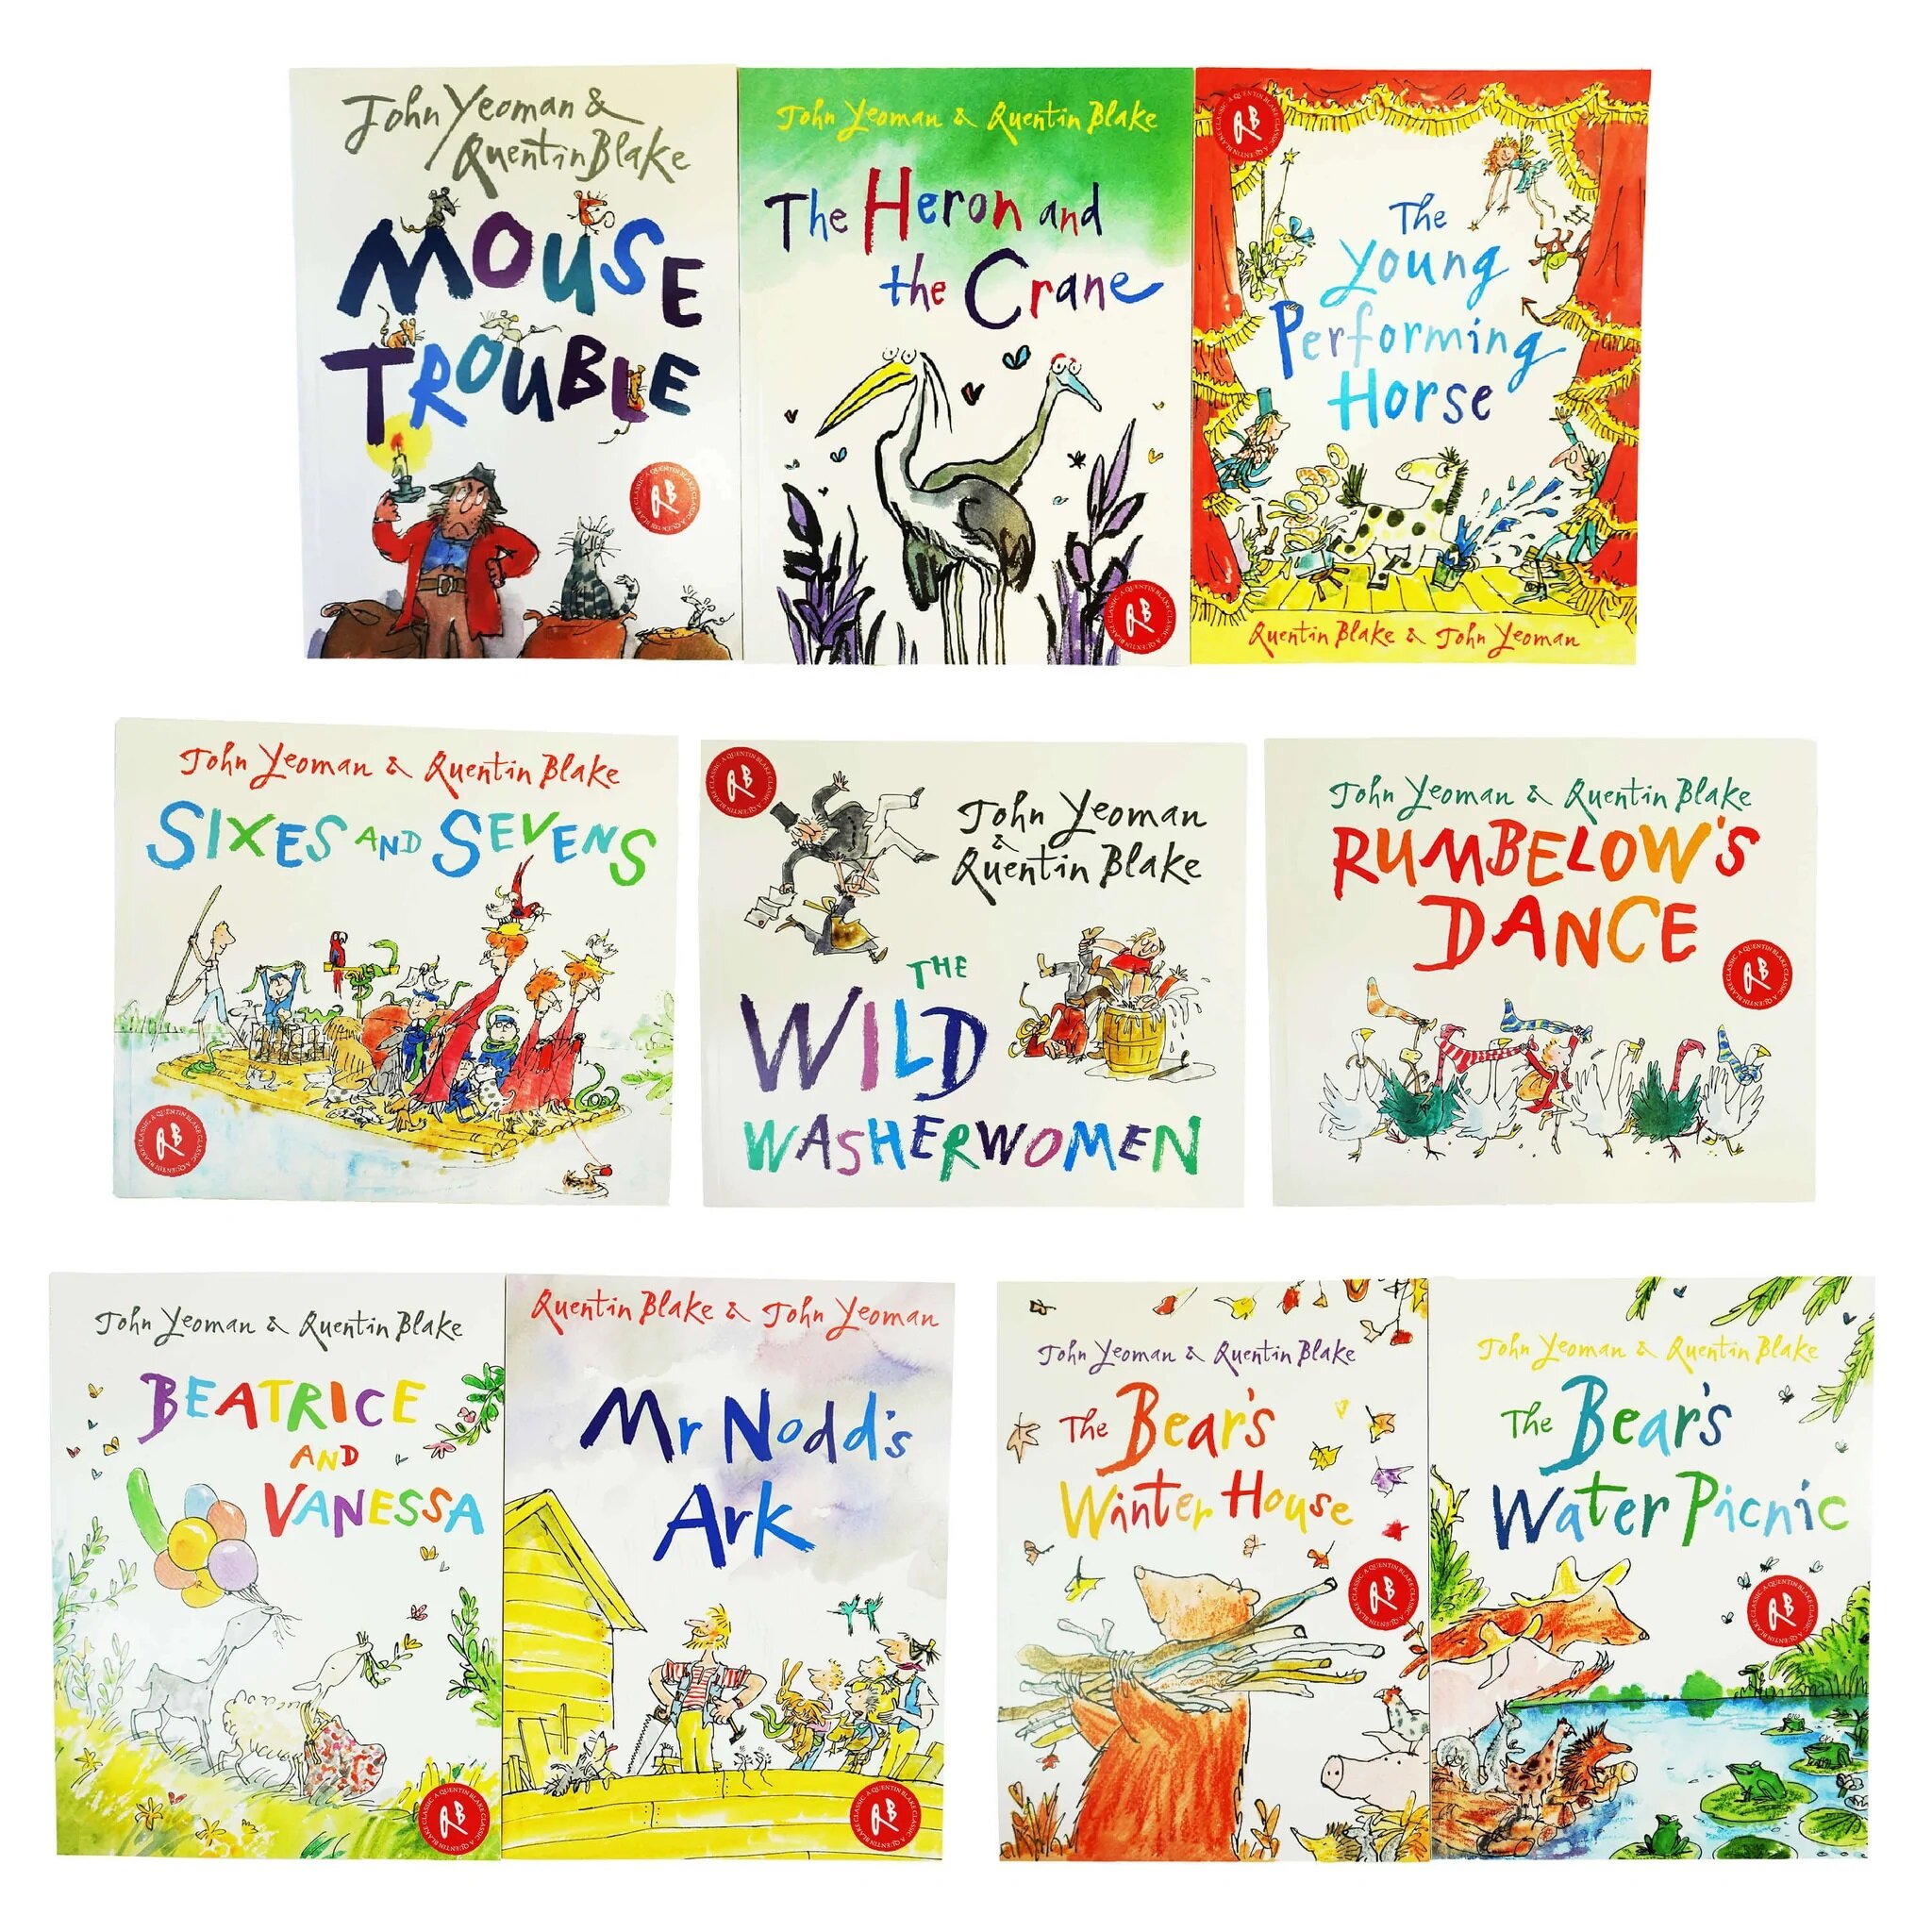 John Yeoman & Quentin Blake Childrens Classic Stories 10 Books Collection Set (Paperback 10권)